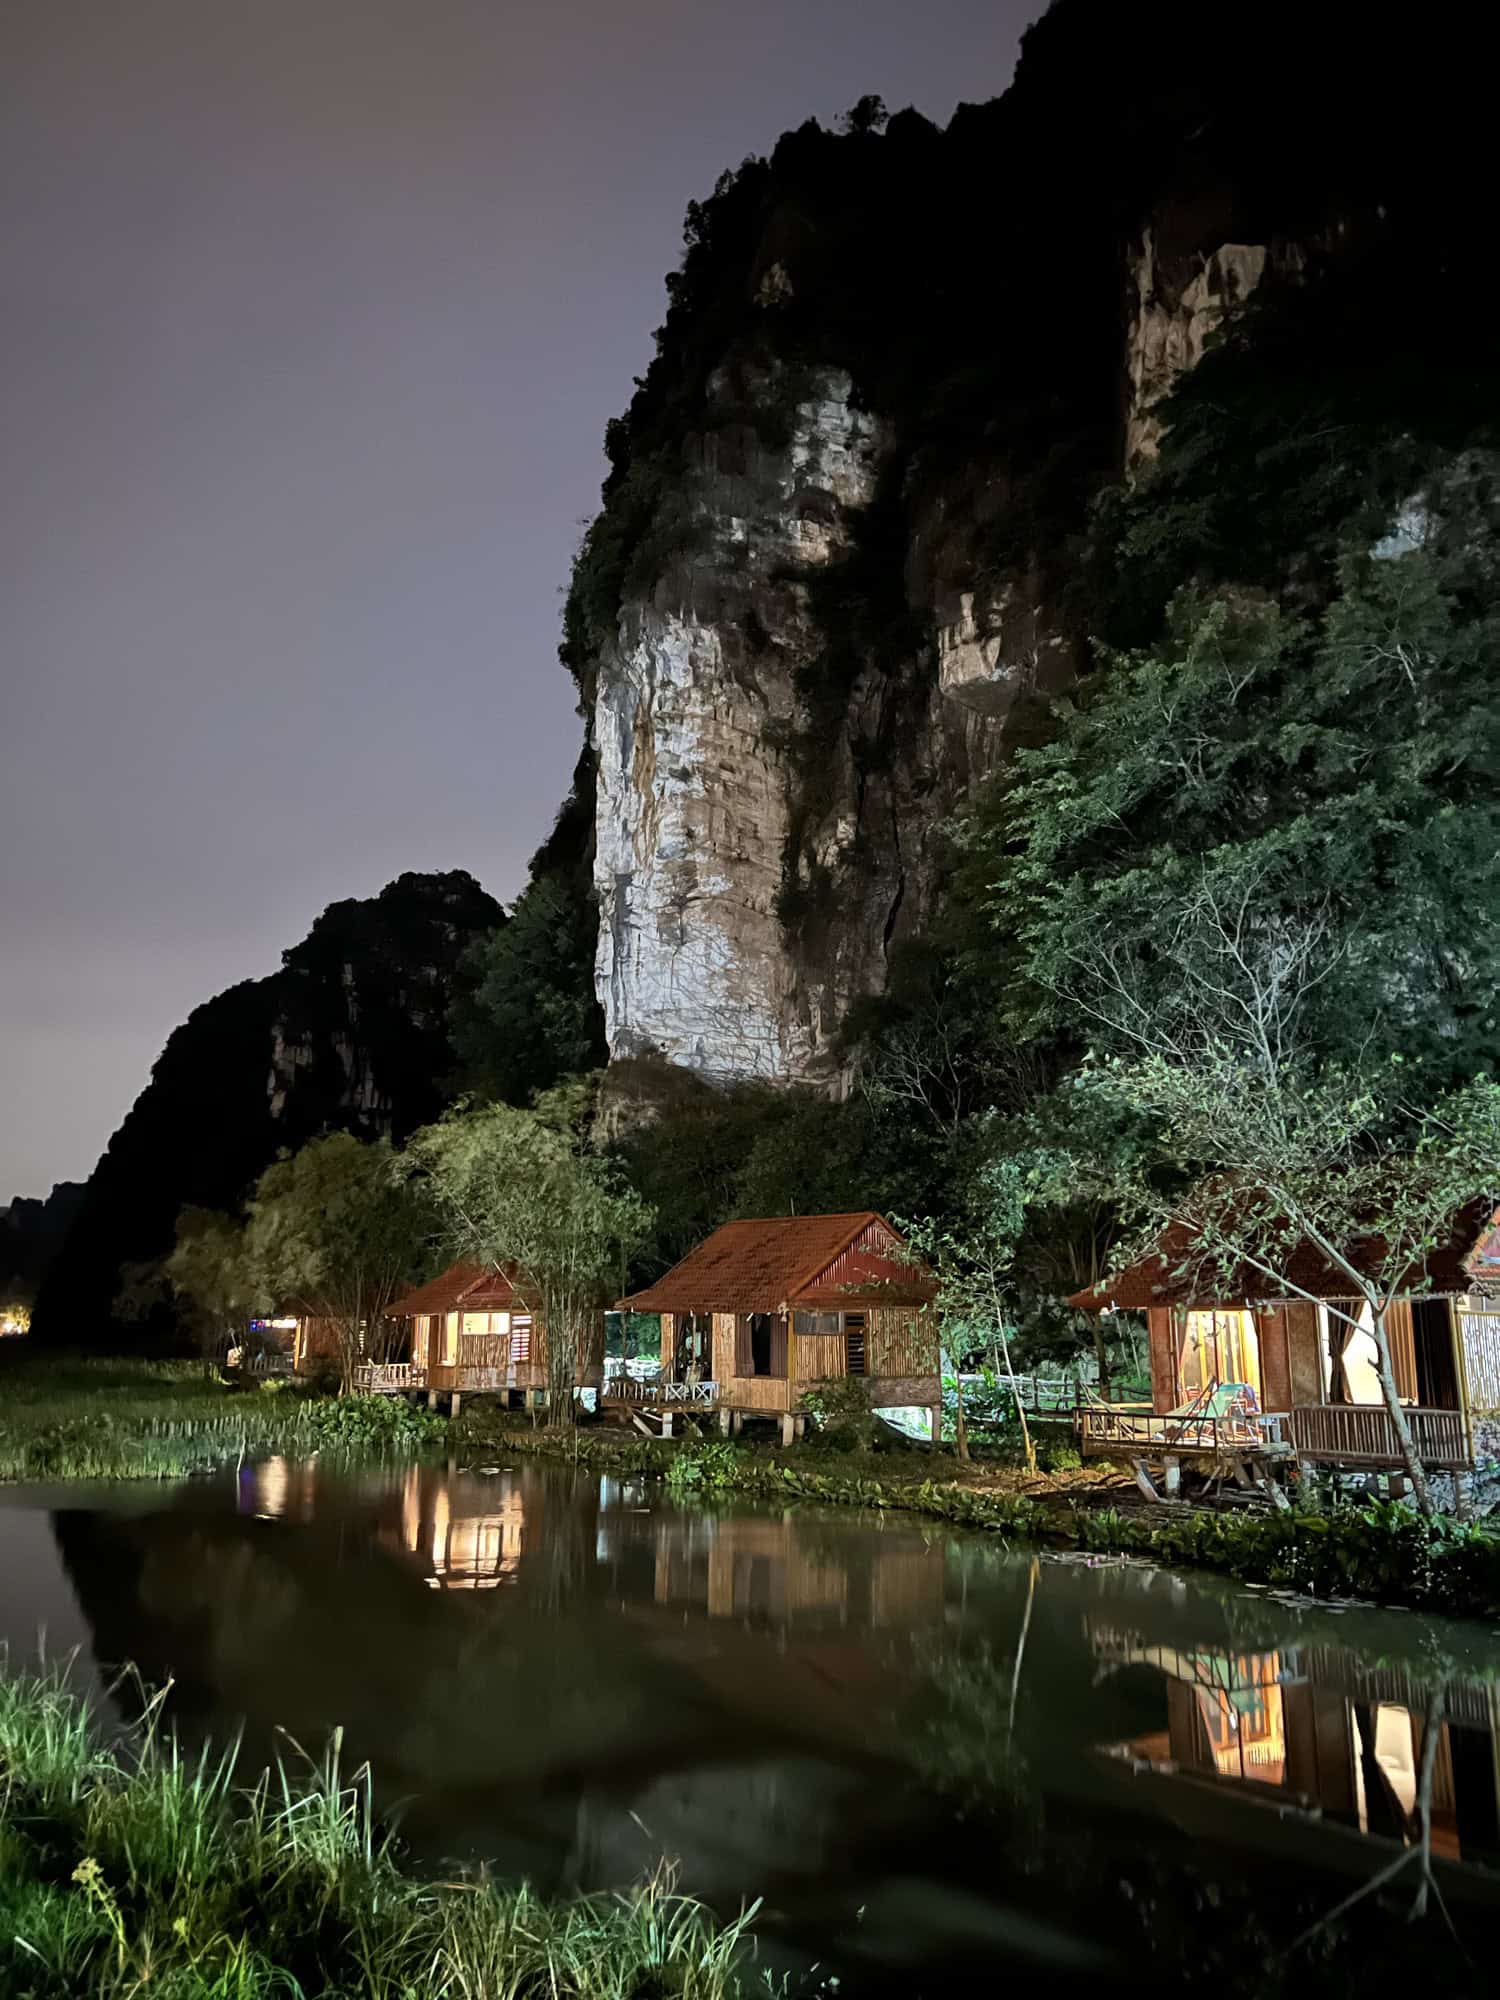 Tranquility in nature at the Lotus Field Homestay in Ninh Binh